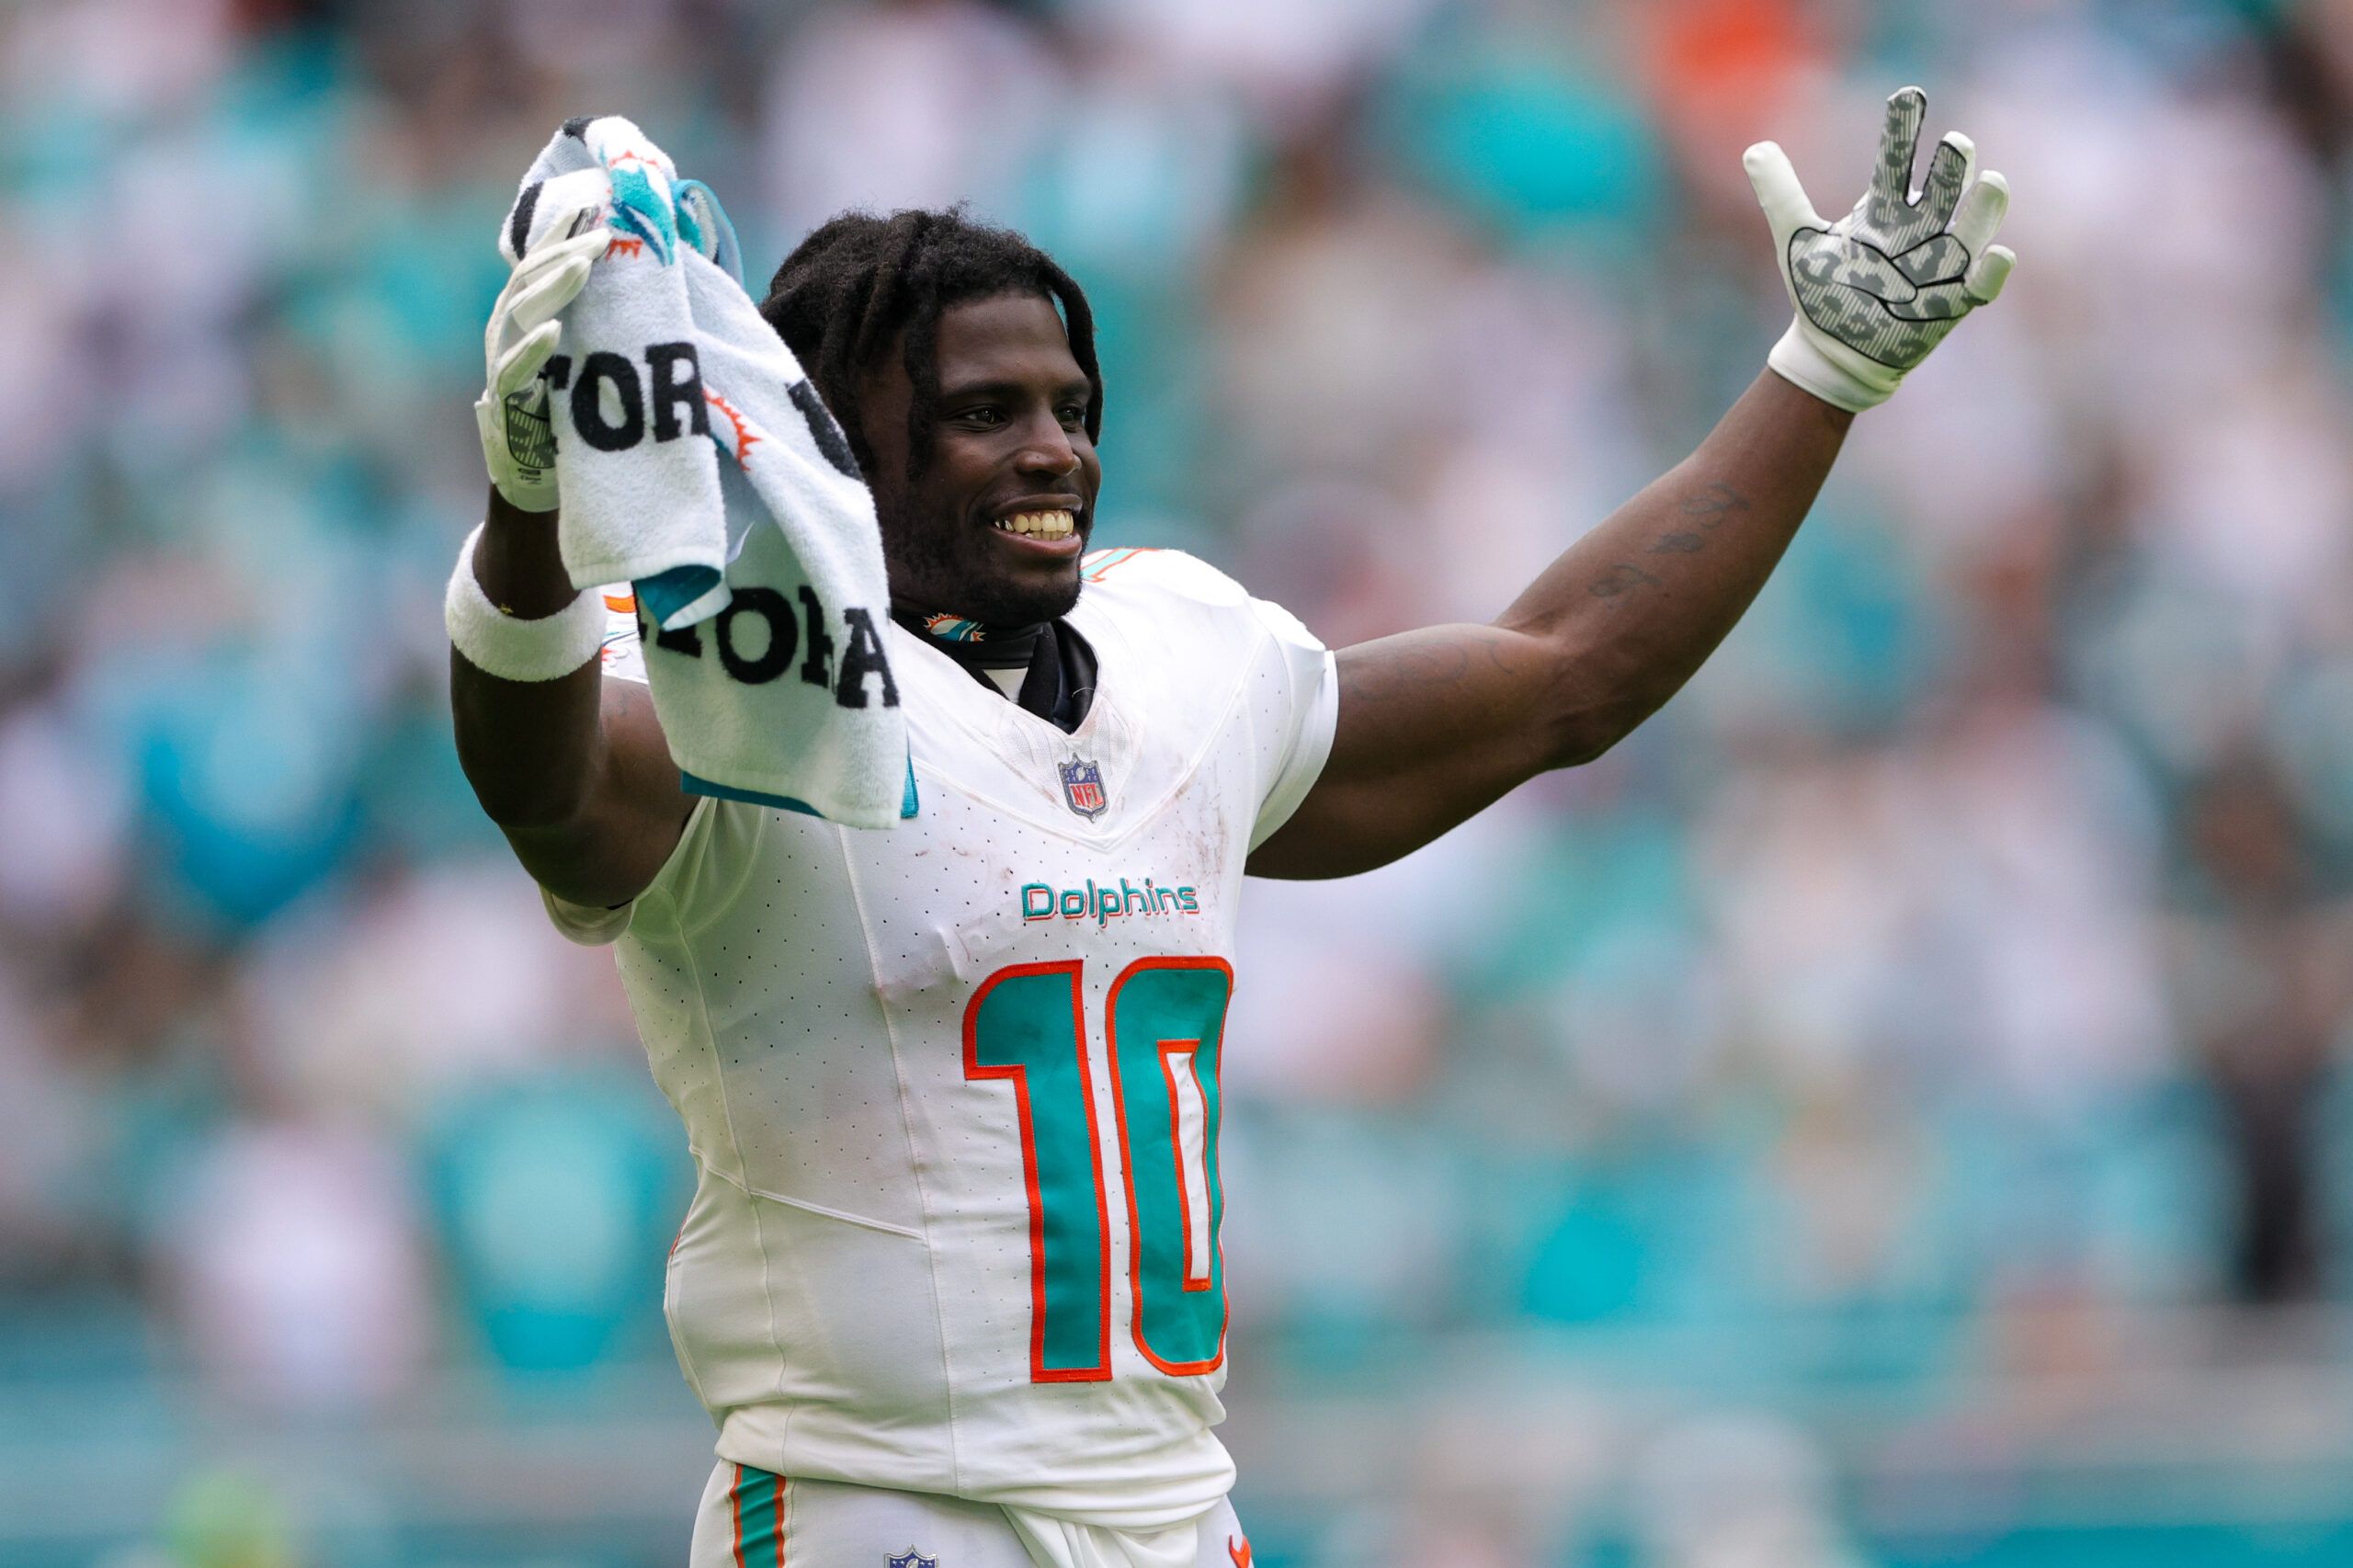 NFL Week 4 Power Rankings (Taylor's Version): Dolphins Rise to the Top